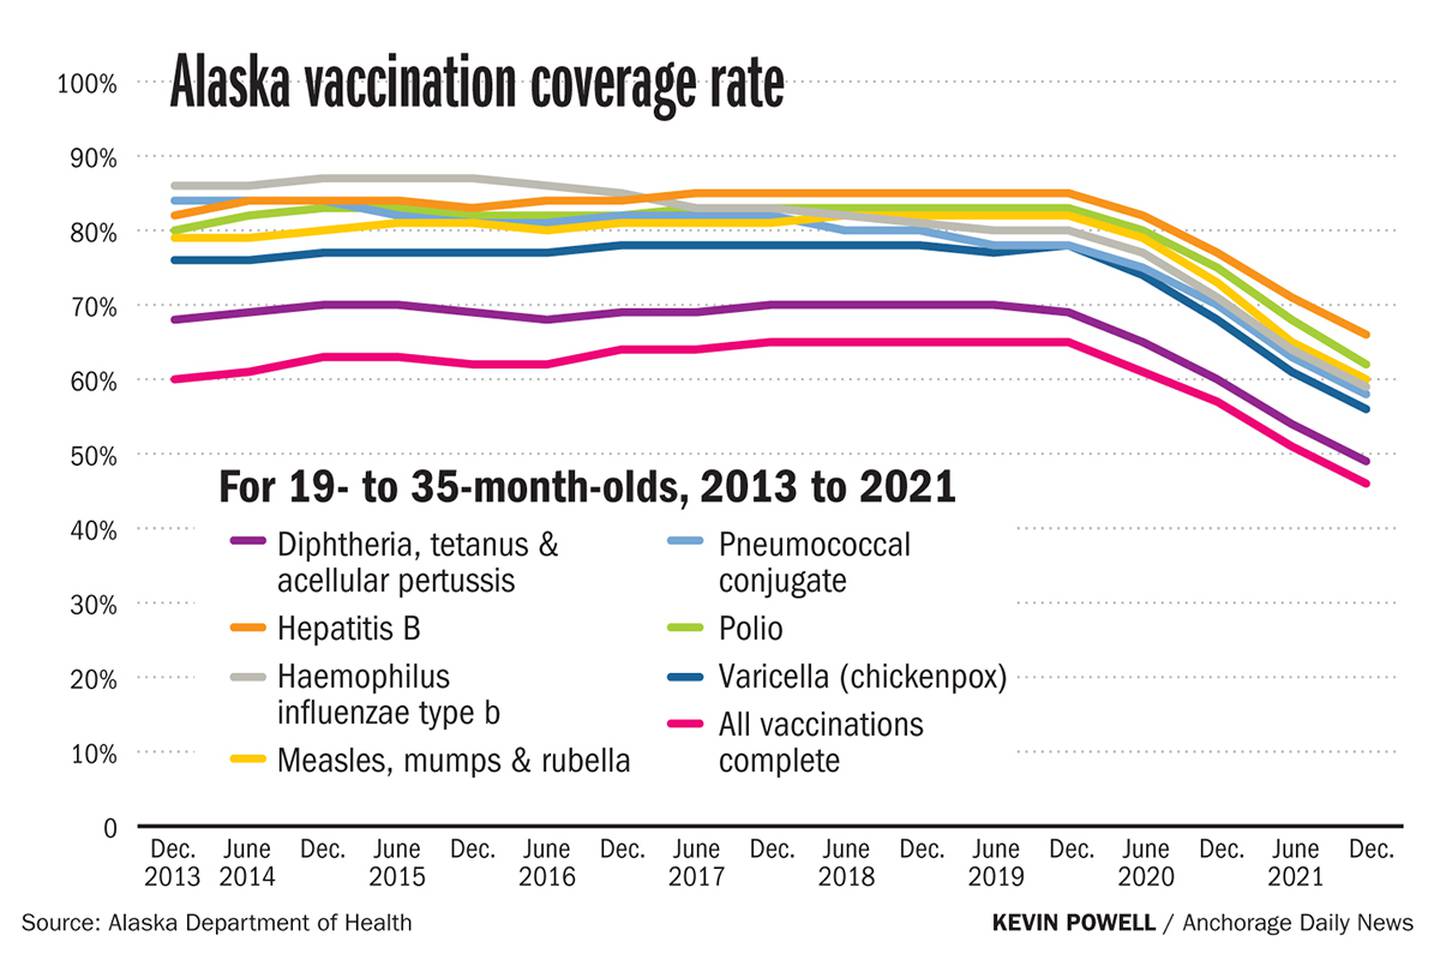 Vaccination rates